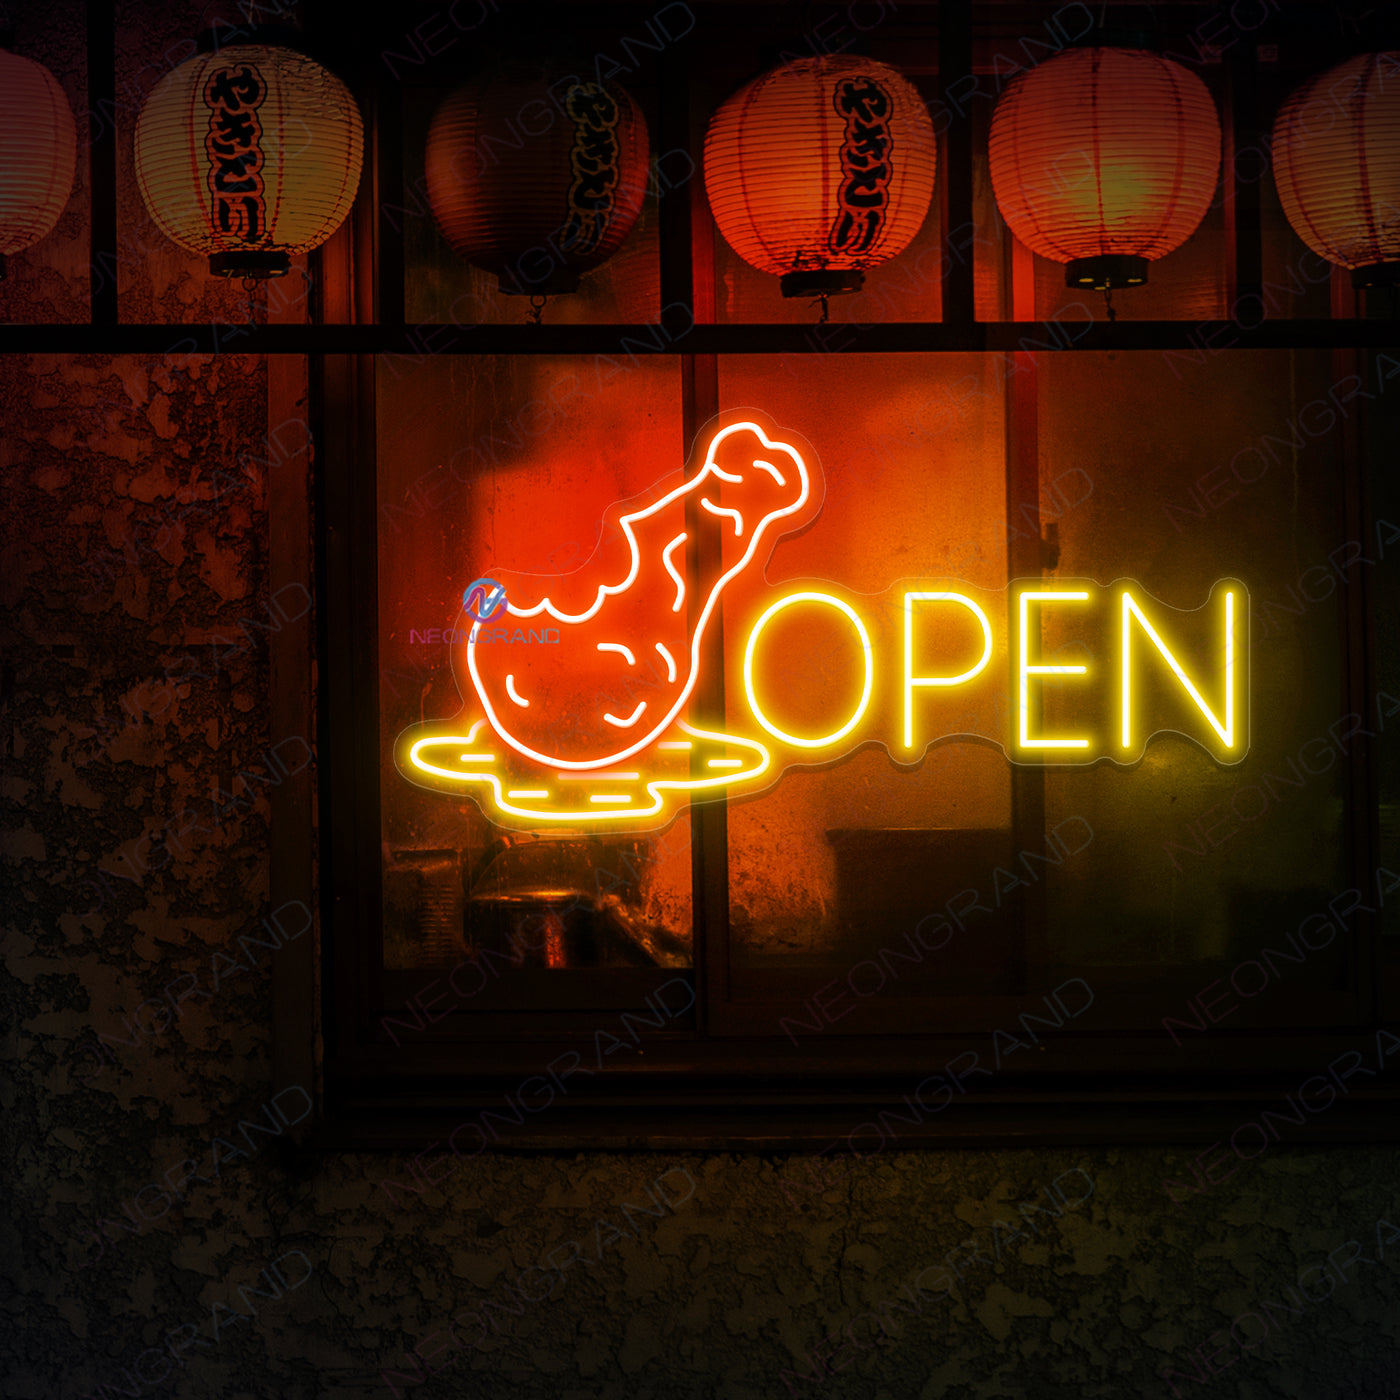 Fried Chicken Open Neon Signs Led Light yellow